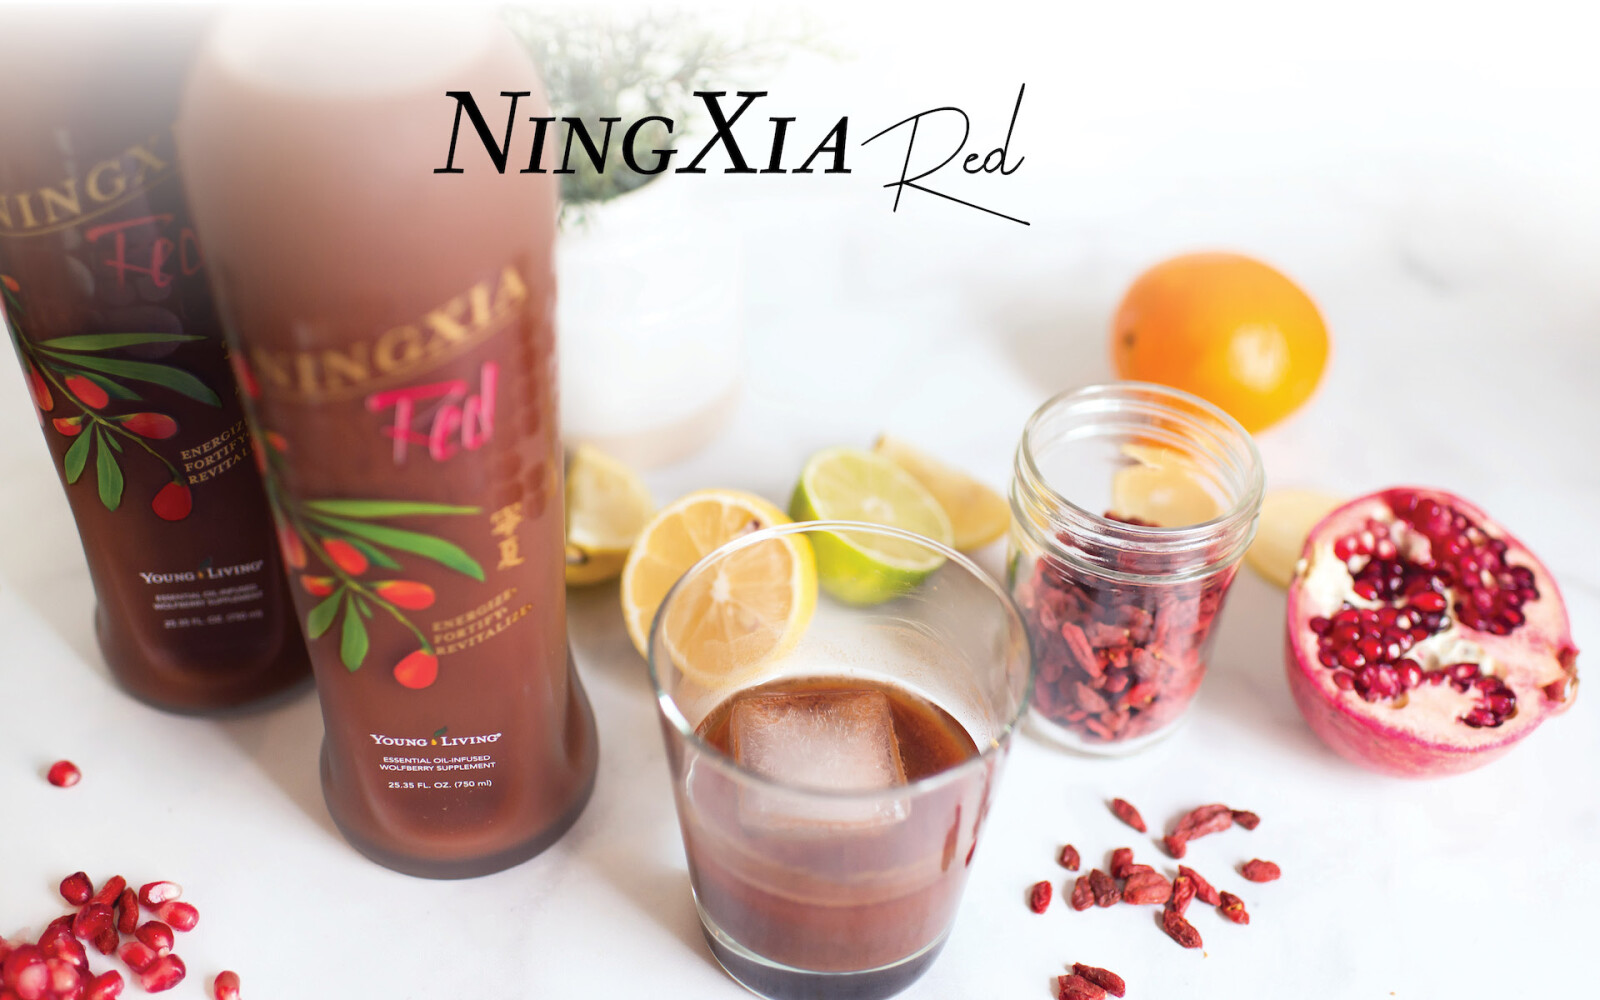 Young Living Ningxia Red Review